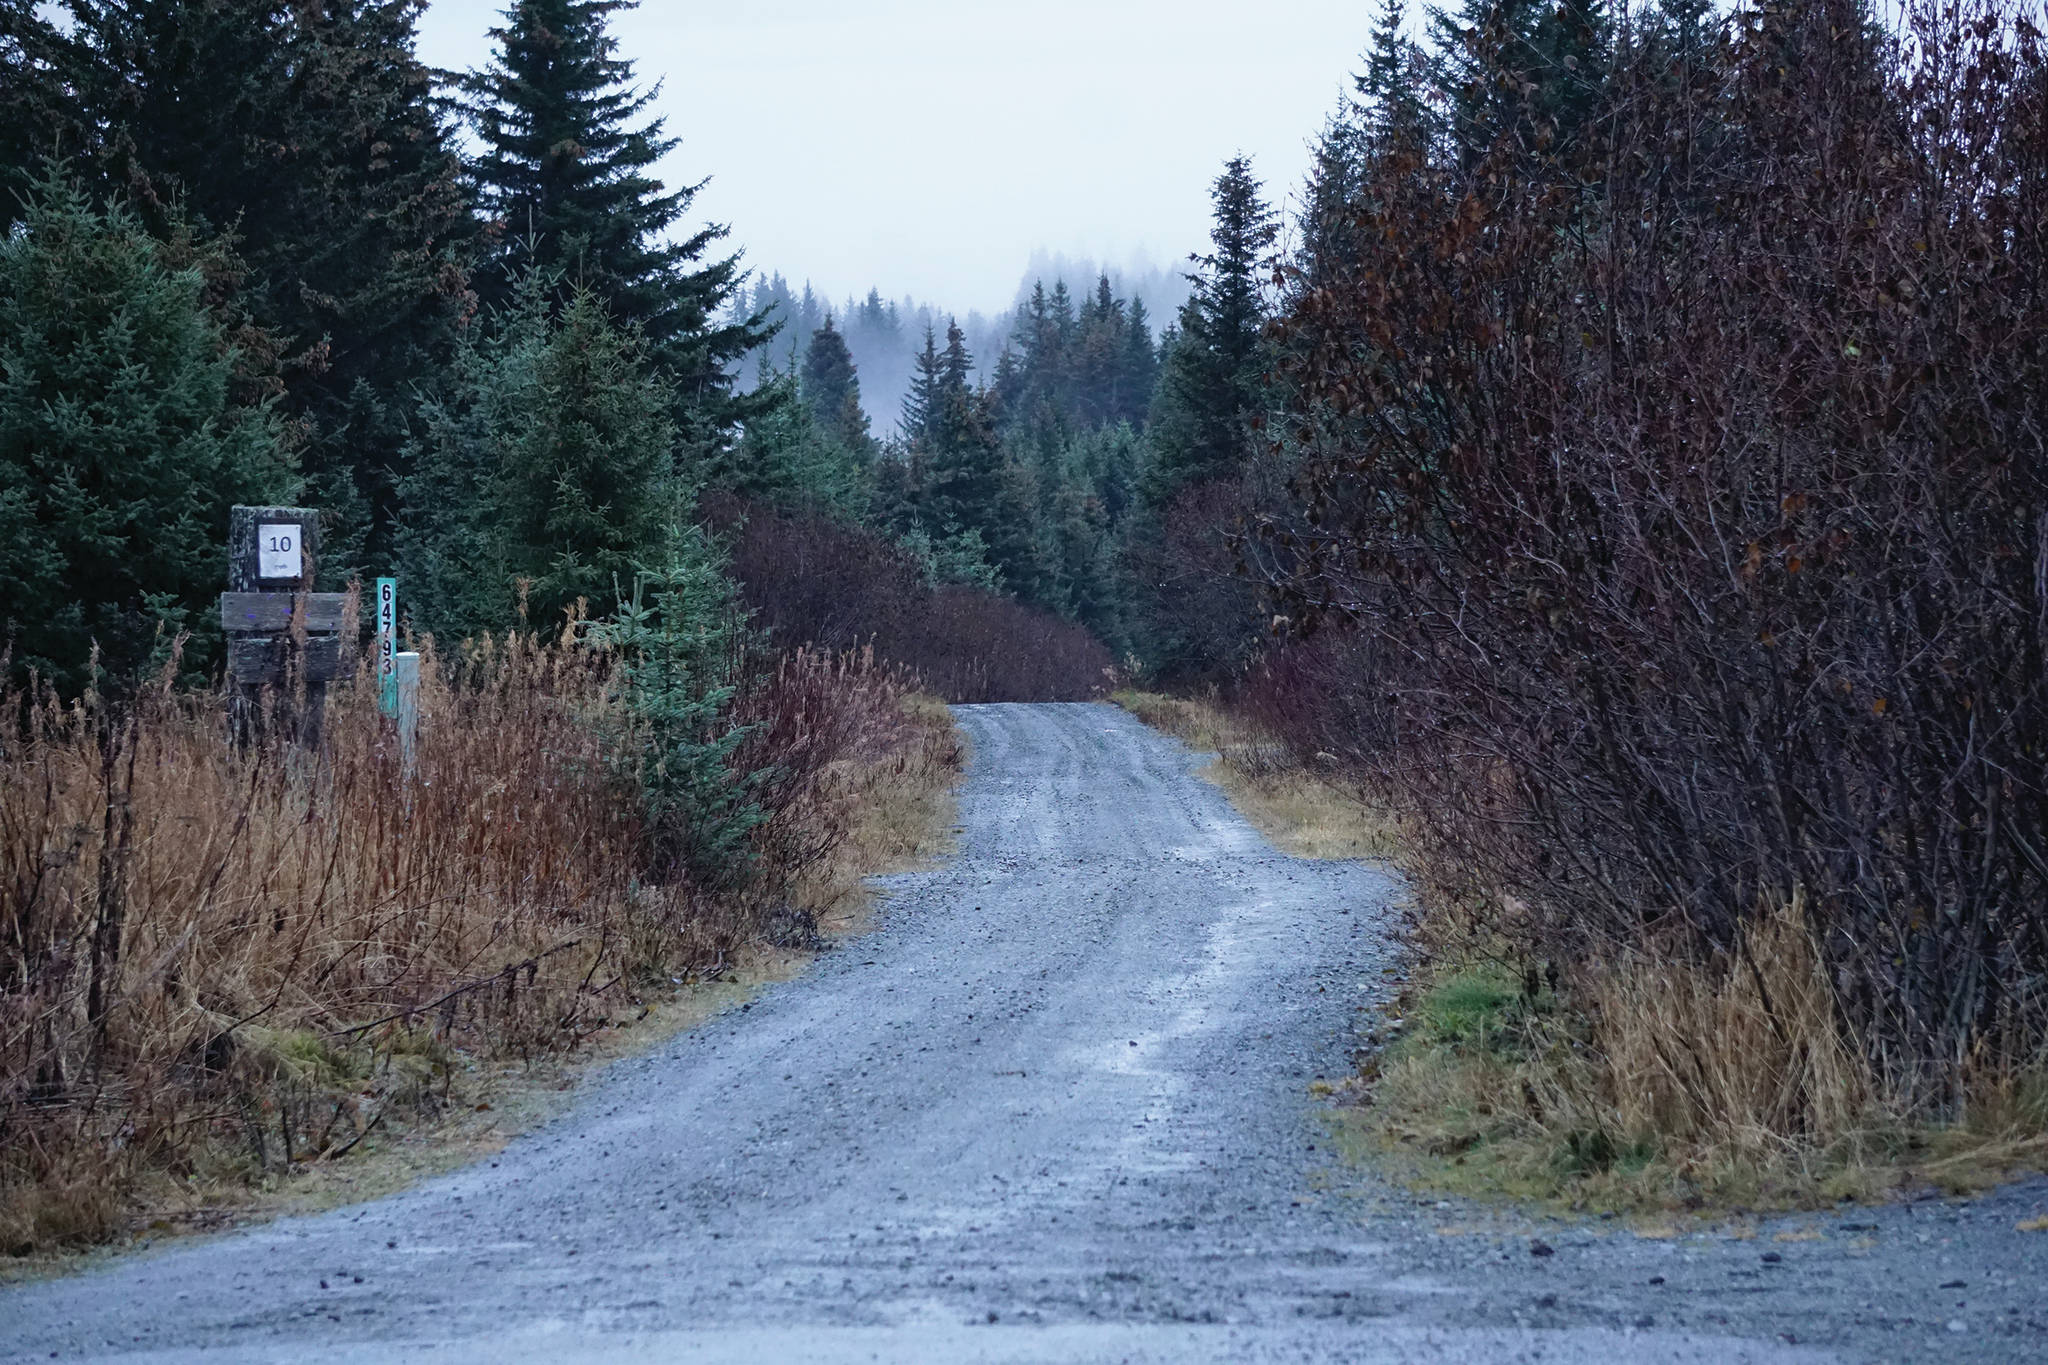 Homer Volunteer Fire Department and Kachemak Emergency Services medics met a bear mauling victim at the Homestead Trail parking lot on Diamond Ridge Road at the top of Nearly Level Road on Monday afternoon, Nov. 3, 2019, in Homer, Alaska. Nearly Level Road runs downhill from Diamond Ridge Road. The man had been hiking on trails near the bottom of Nearly Level. (Photo by Michael Armstrong/Homer News)